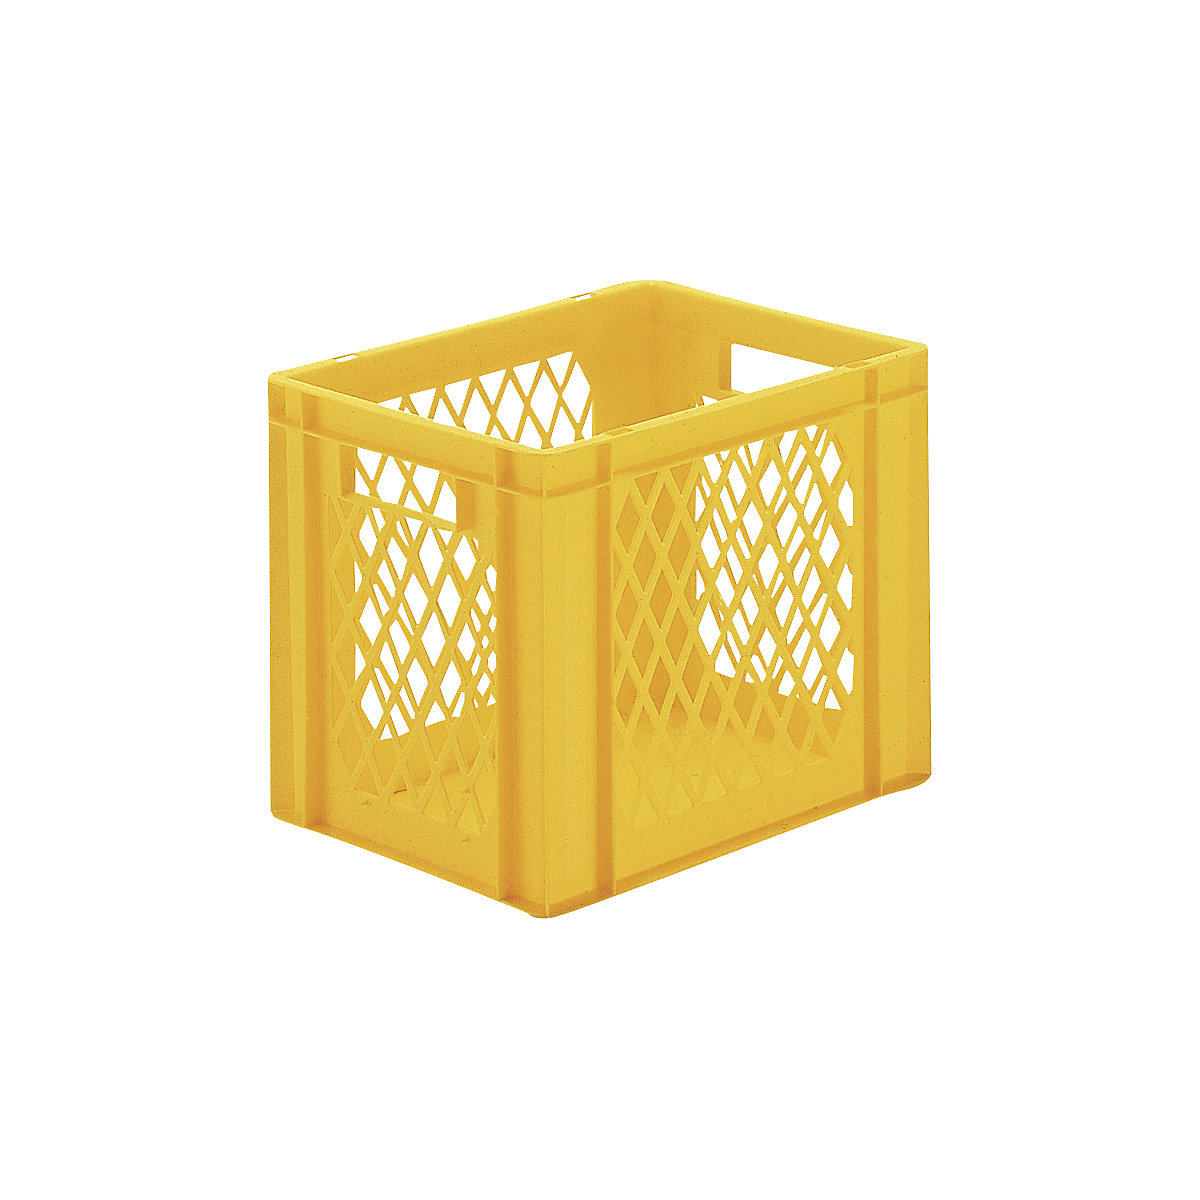 Euro stacking container, perforated walls, closed base, LxWxH 400 x 300 x 320 mm, yellow, pack of 5-8